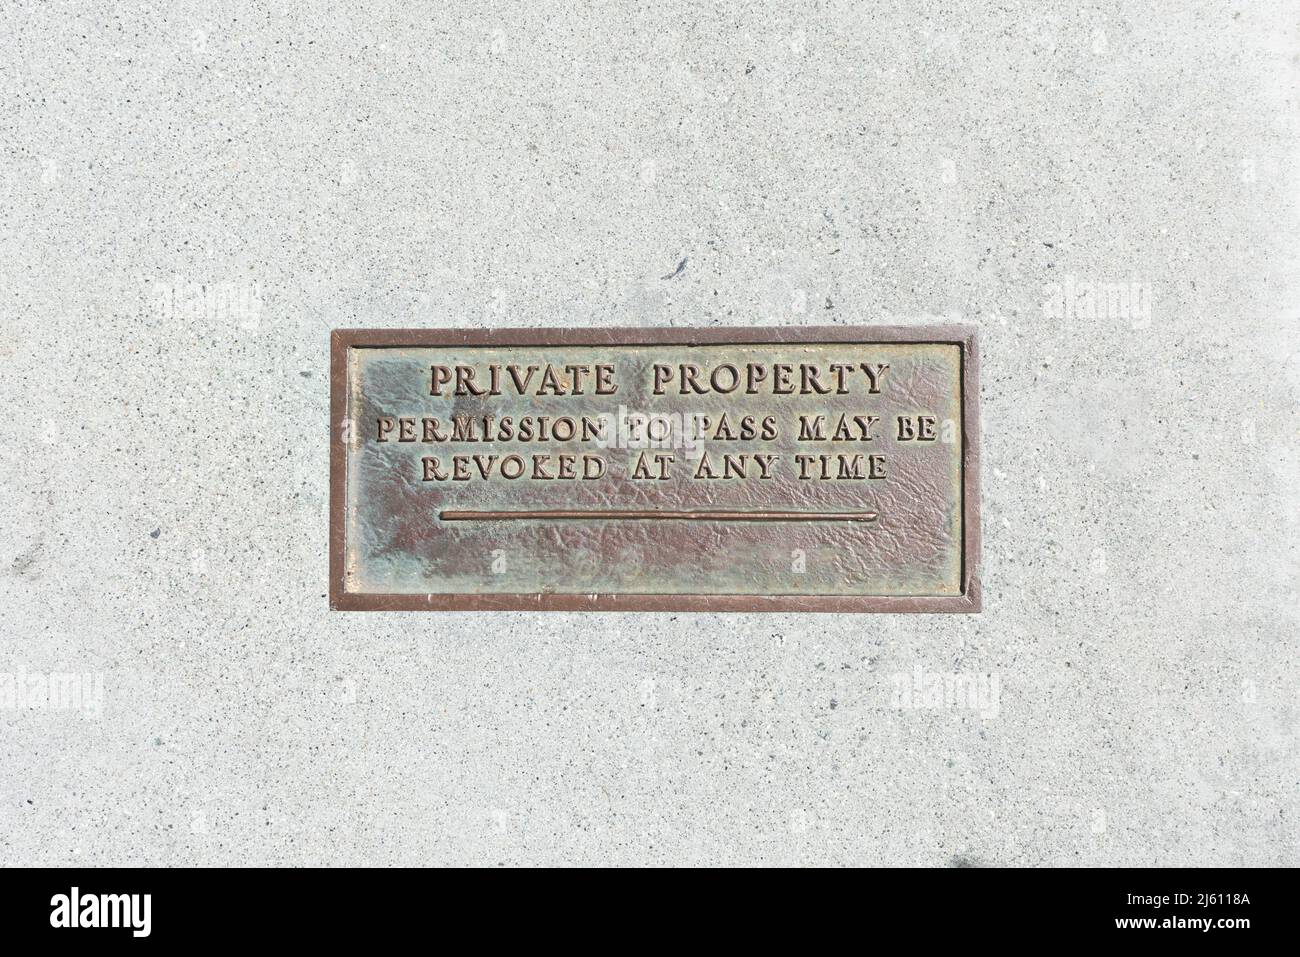 Private Property Permission To Pass May Be Revoked Any Time metal sign, plaque on concrete sidewalk. Stock Photo